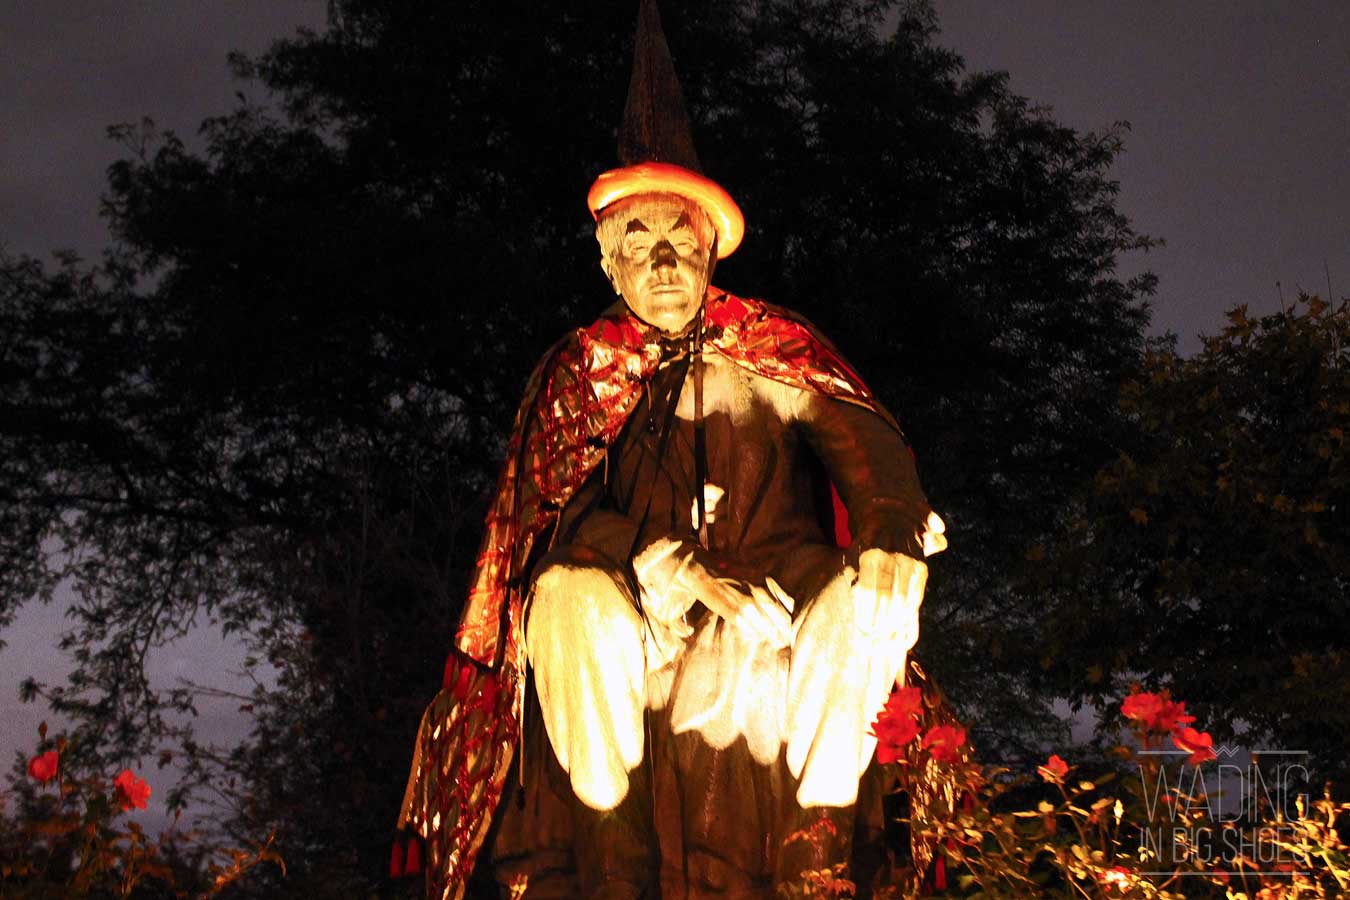 Hallowe'en in Greenfield Village Tips To Make The Most Of Your Visit